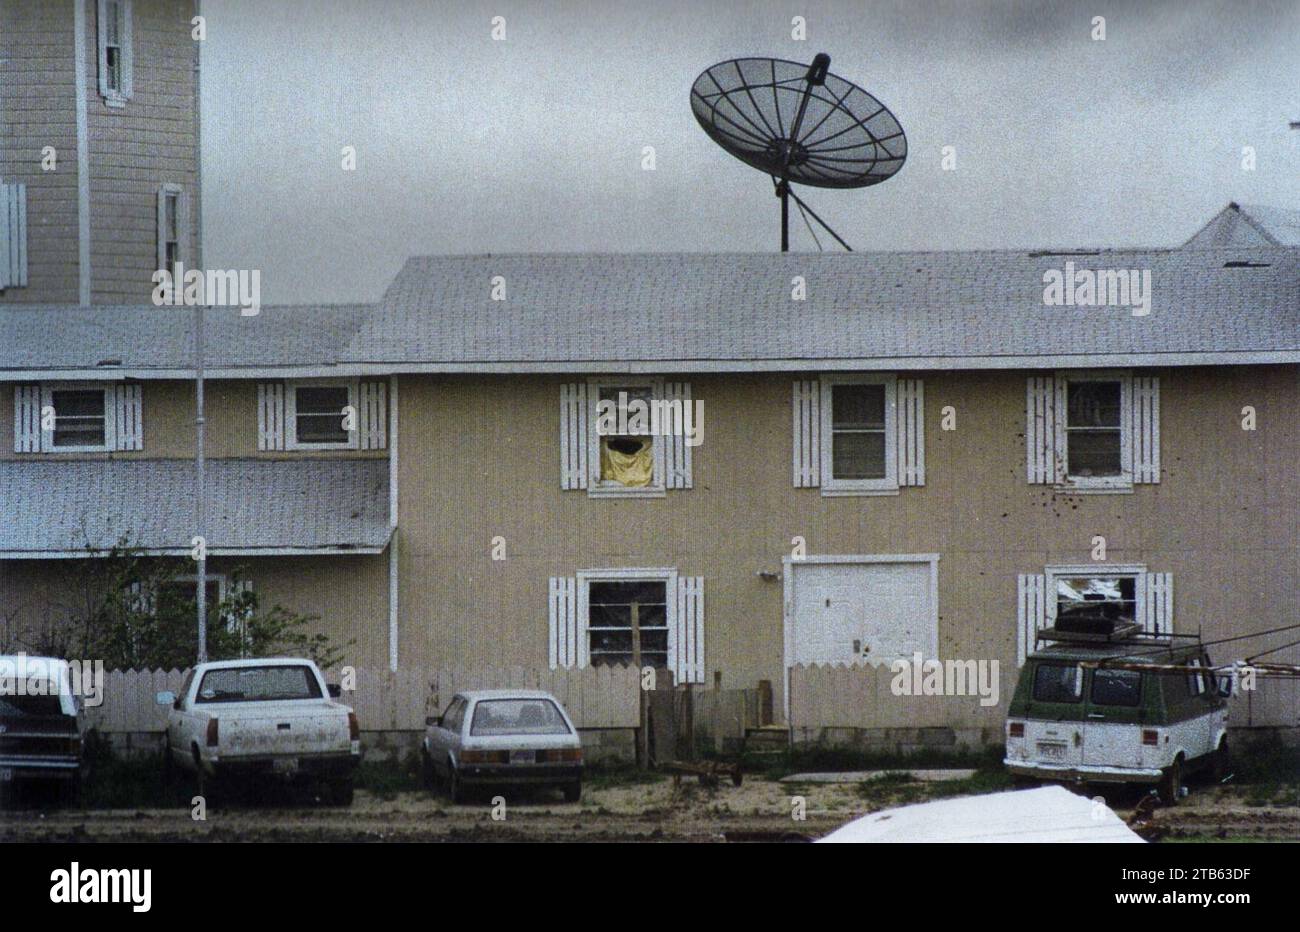 Waco Siege – Front of Mount Carmel residence after shootout with ATF agents. Stock Photo